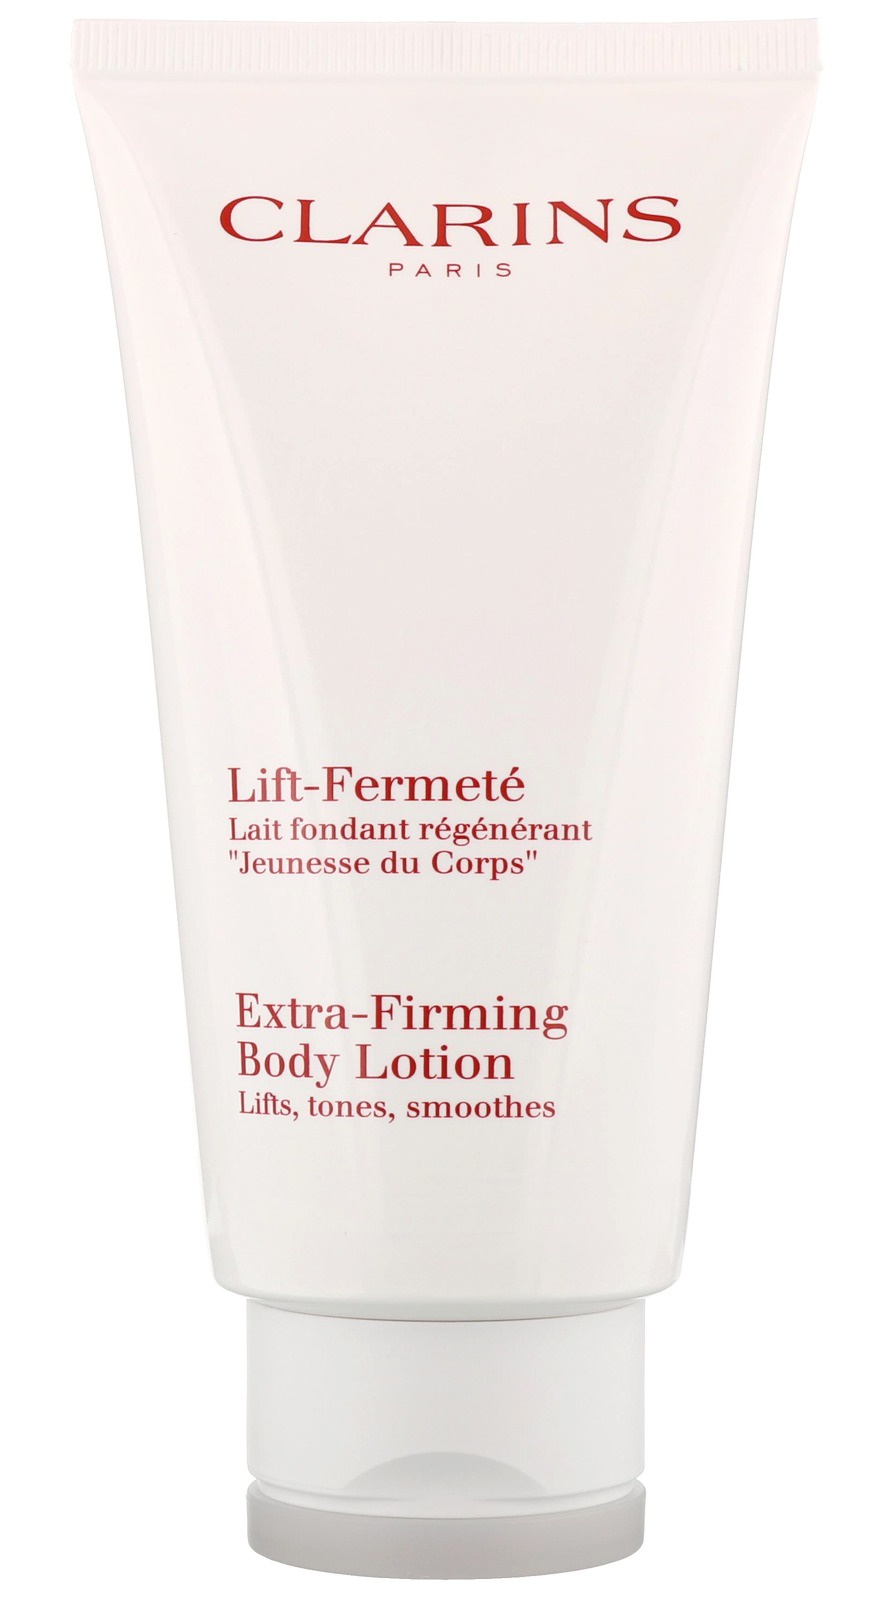 Clarins Clarins Extra-Firming Body Lotion